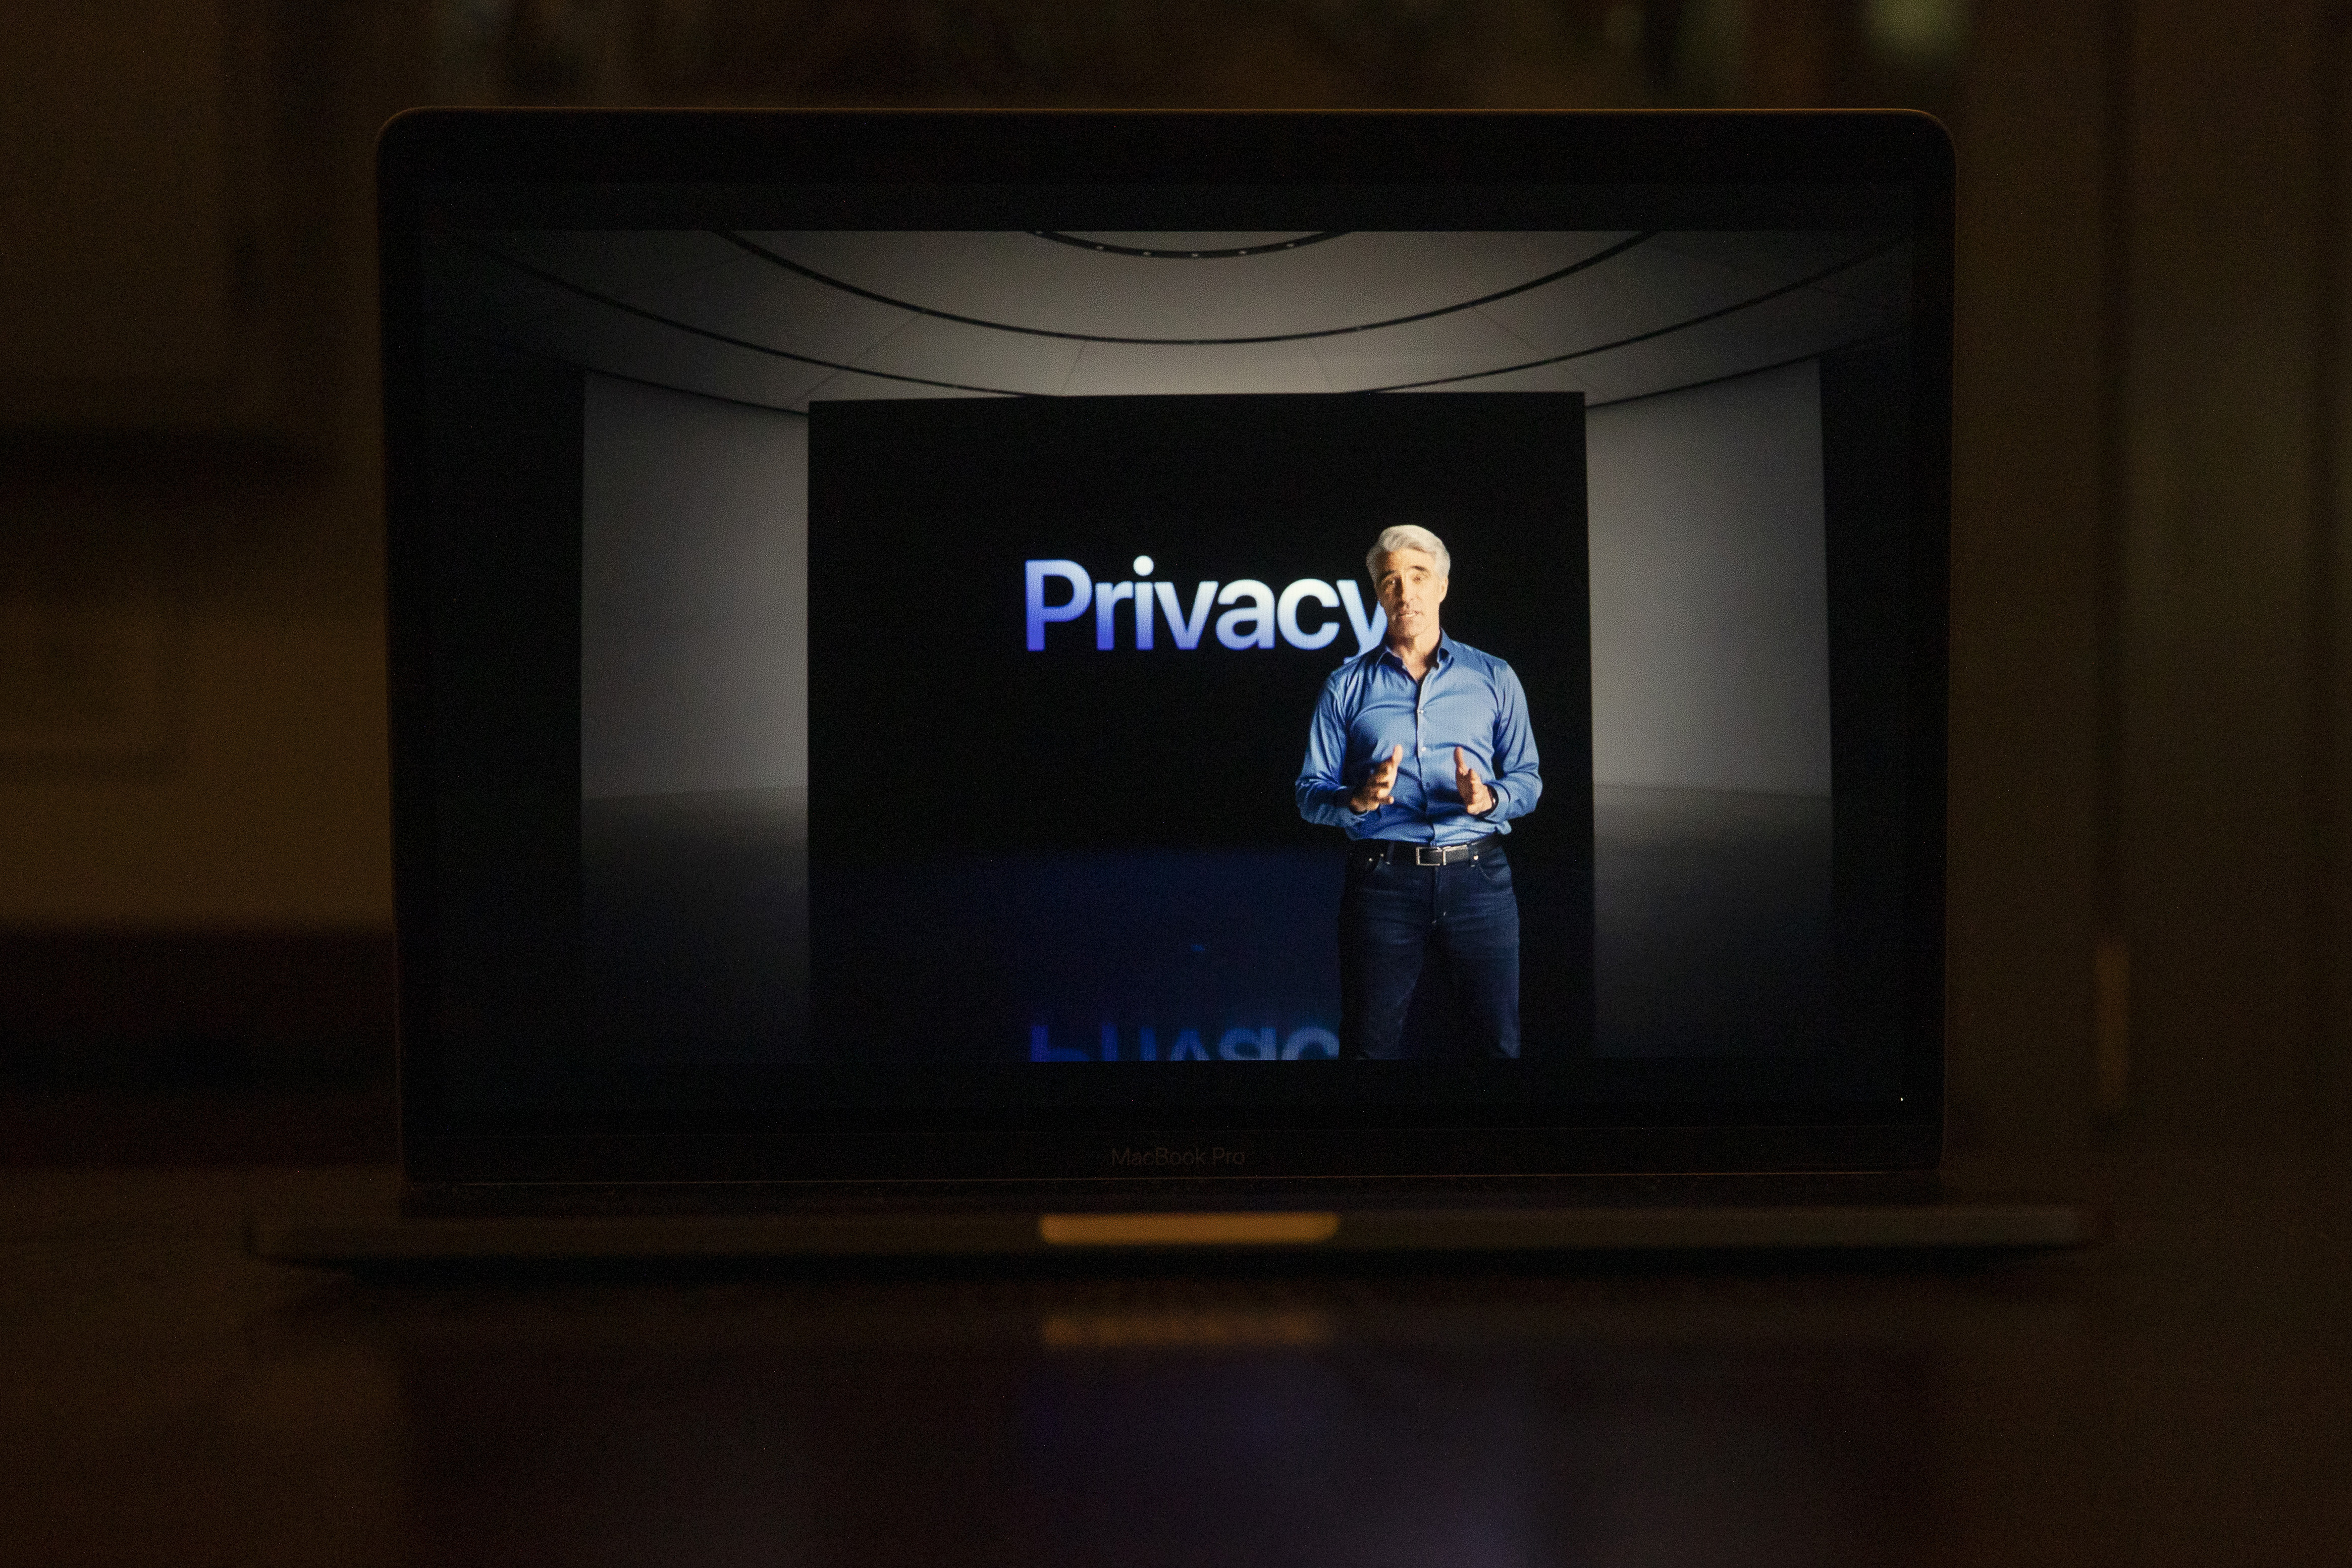 Apple’s senior vice president of software engineering, Craig Federighi, stands in front a screen that reads, “Privacy.”